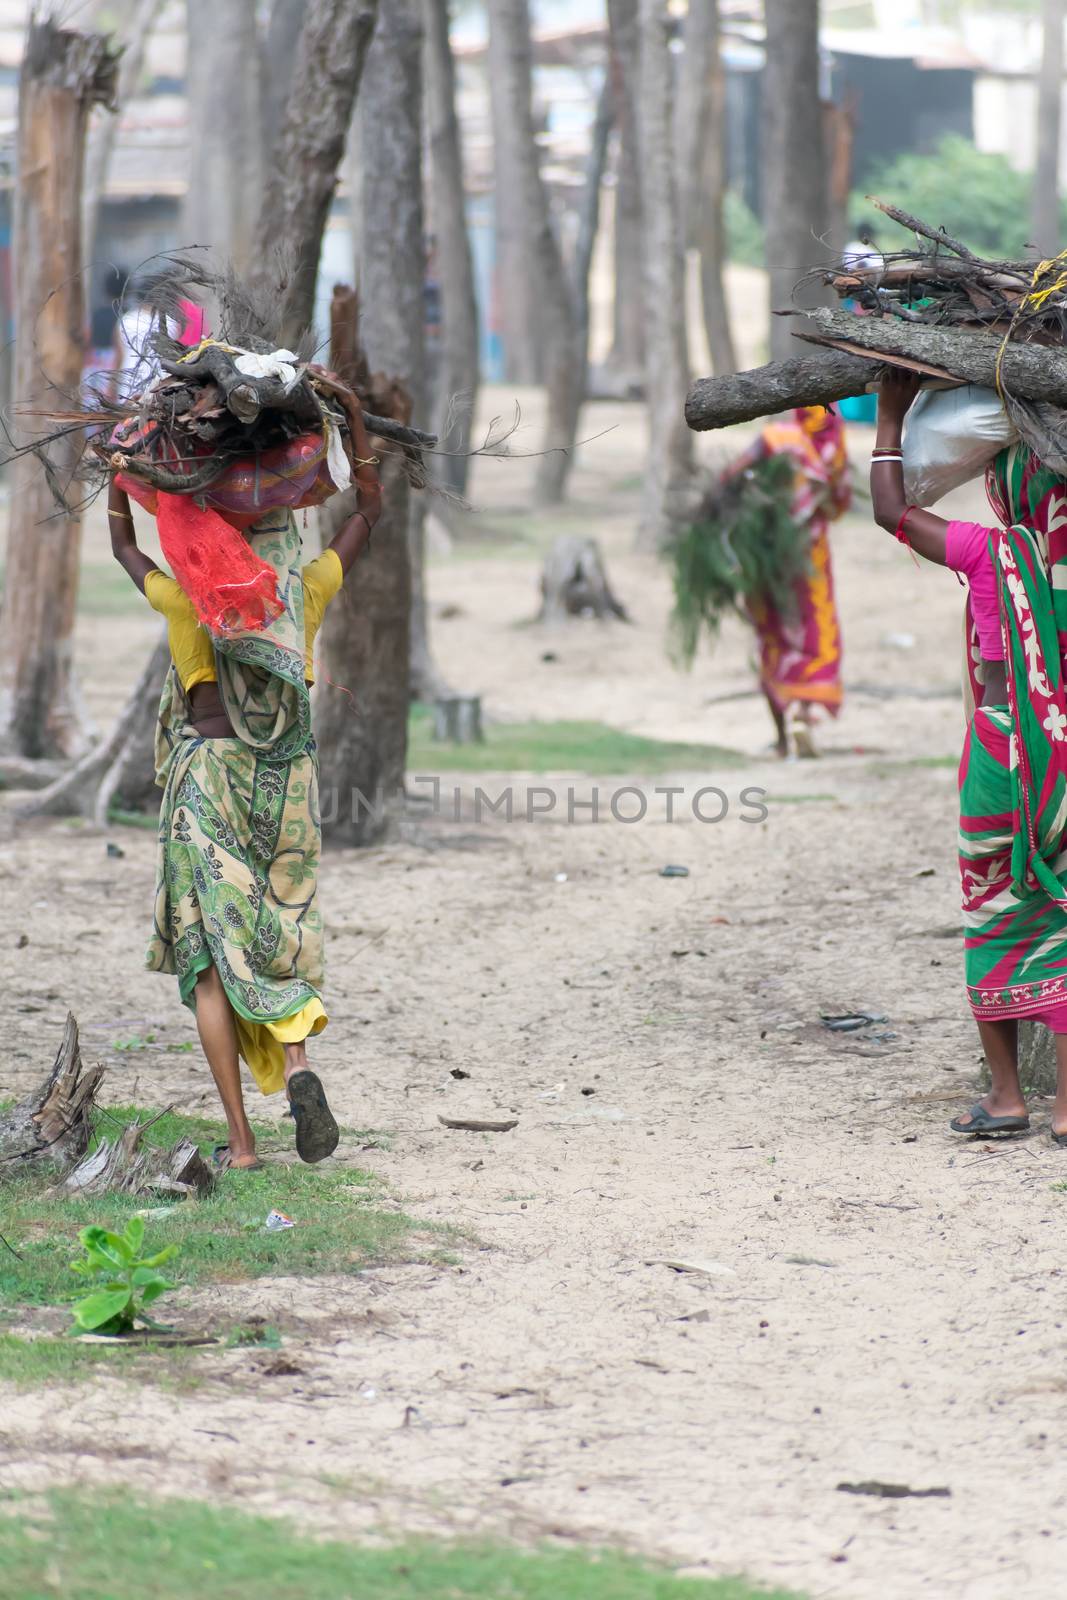 Rural Indian Villagers Women and girls cut firewood from protected nature reserve area, carry heavy loads on head walking miles, for use as woodfuel or biofuel. Forest Loss Energy Conservation Concept by sudiptabhowmick